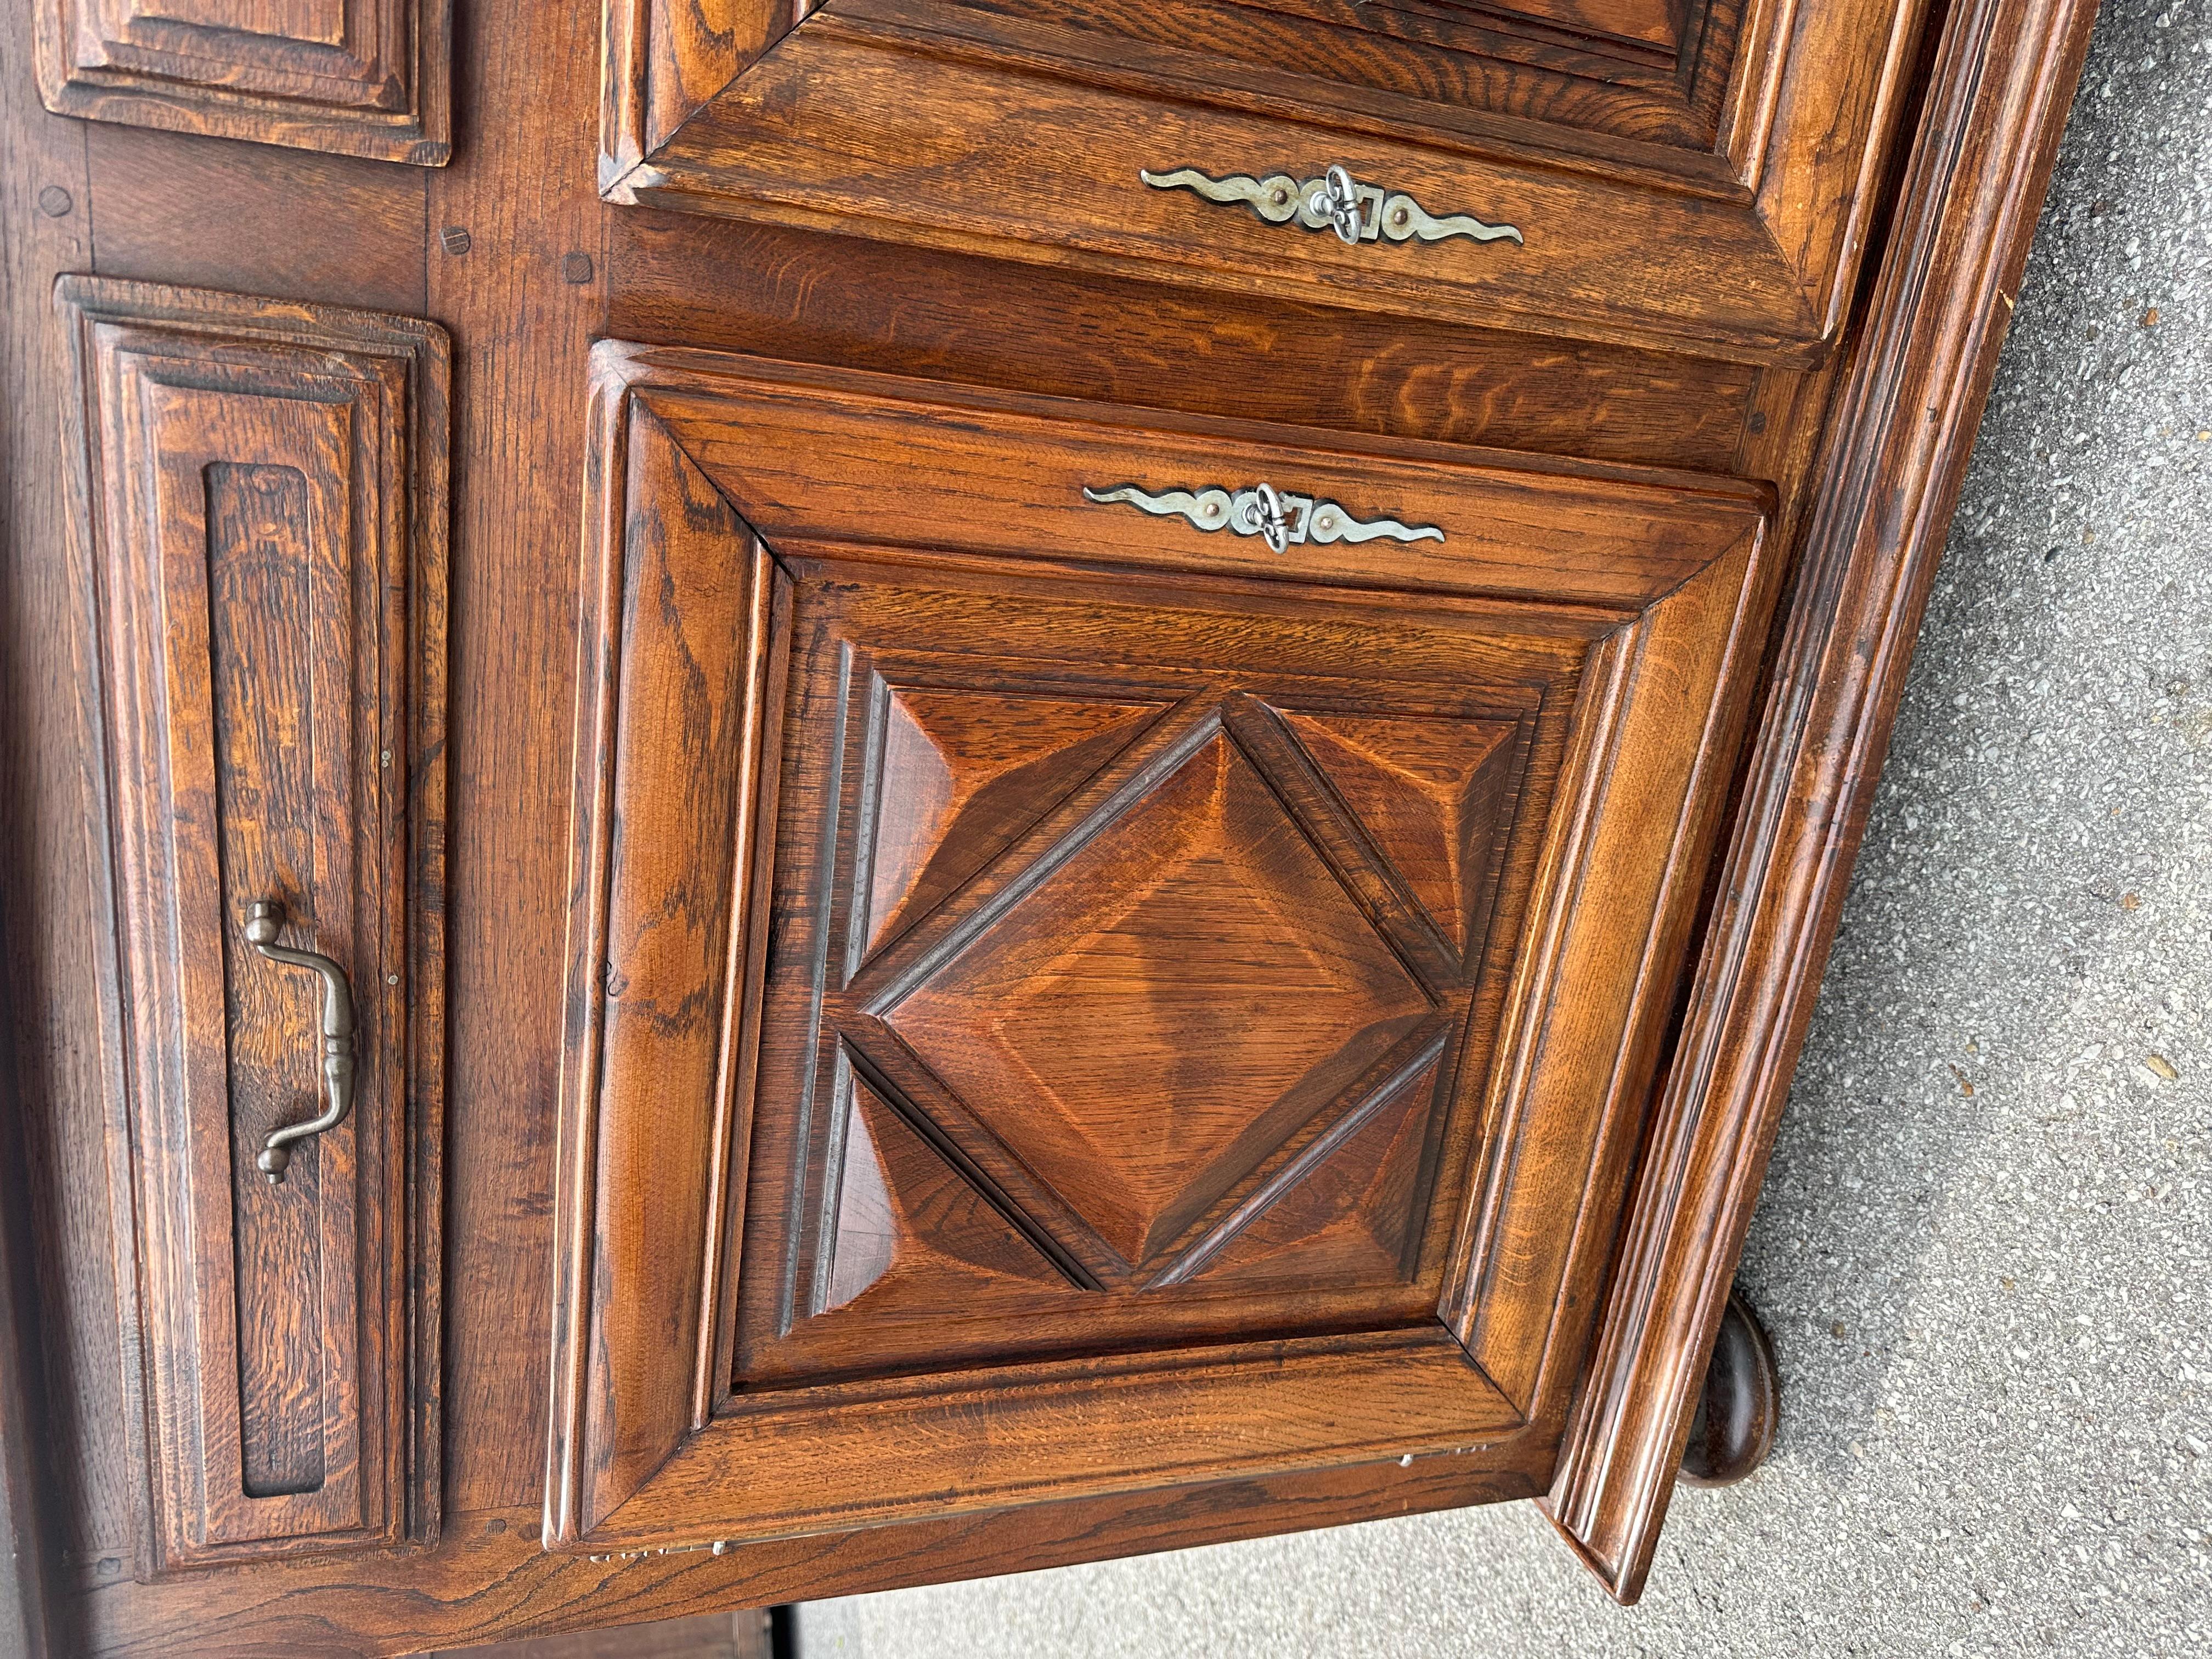 This is a great Spanish server featuring a geometric front raised panels on the ends. The shallow depth makes it especially attractive. And excellent piece with all drawers and doors in perfect condition